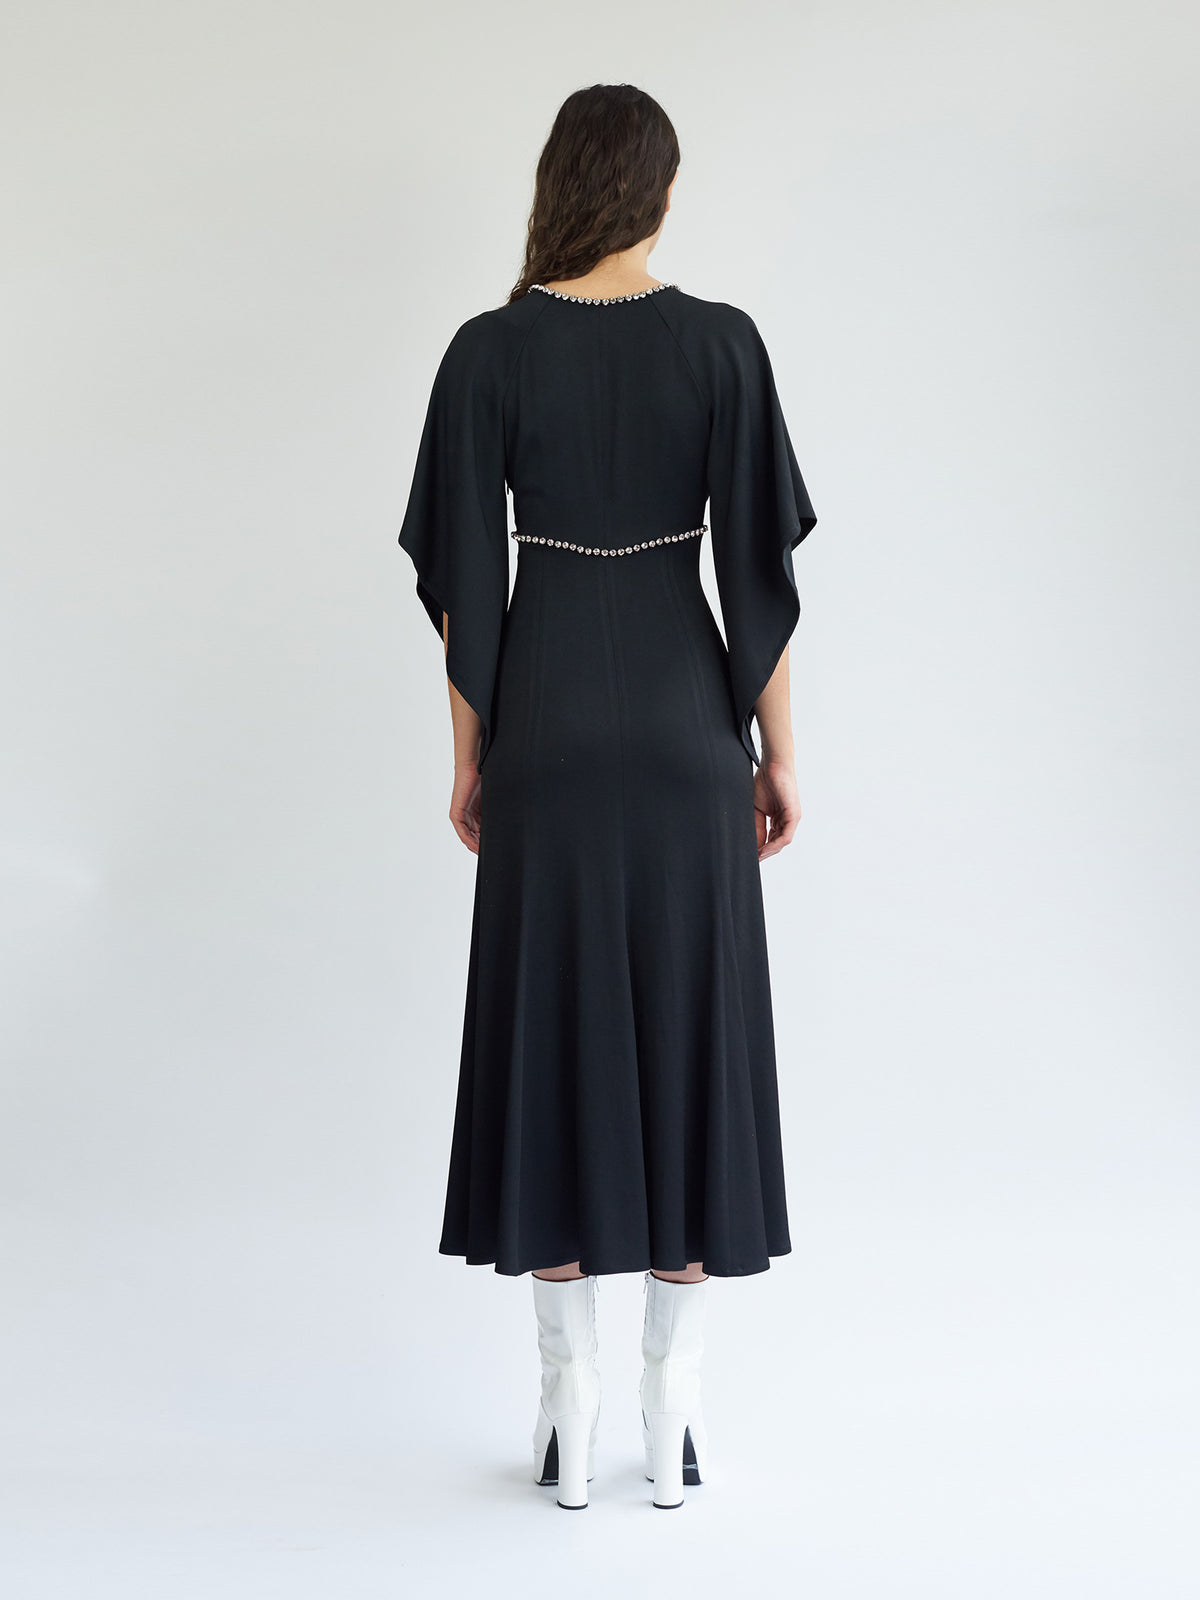 Dress with Flowing Sleeves and Stone Details